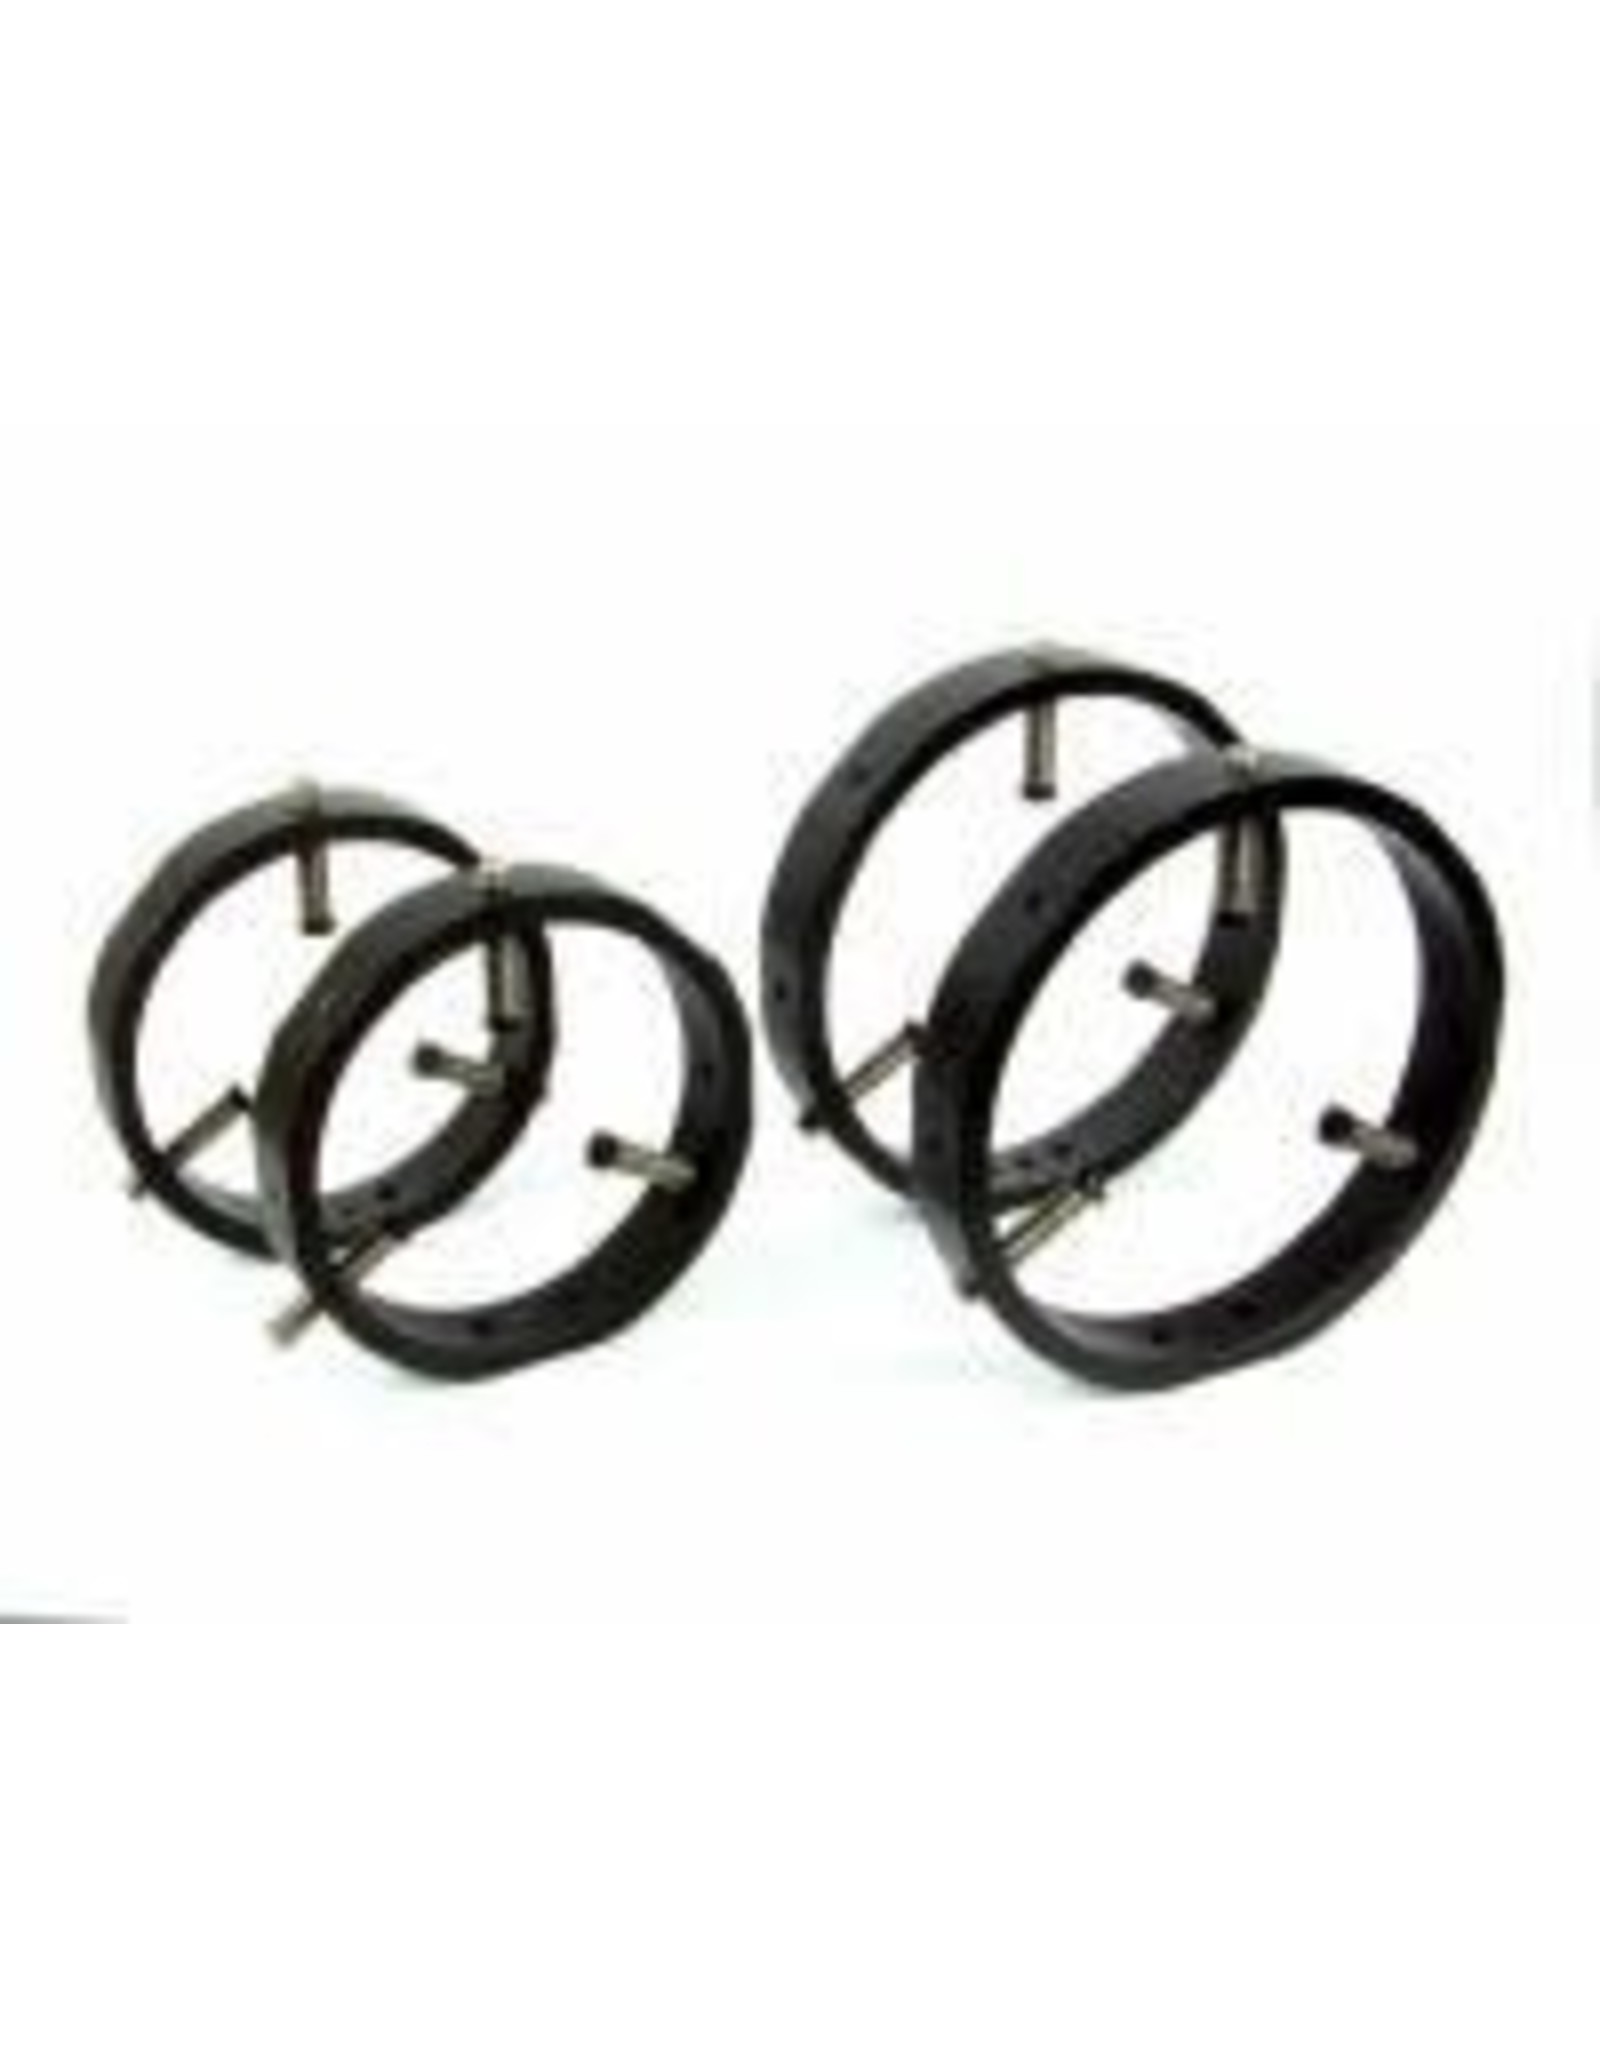 Baader Planetarium Baader 5" Guidescope Rings for 60 mm - 110 mm OD Scopes